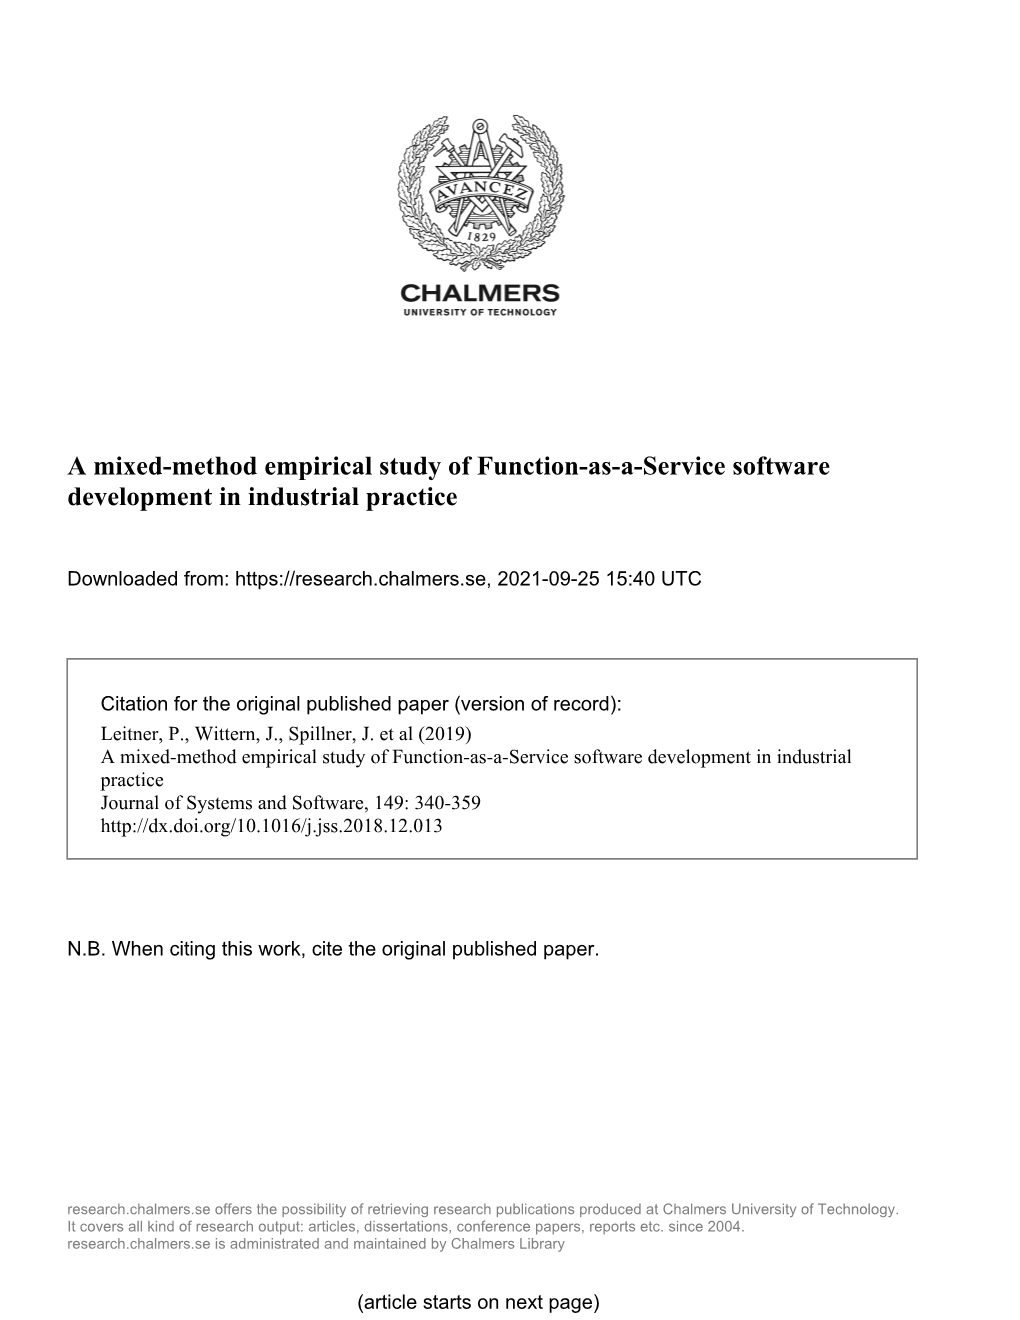 A Mixed-Method Empirical Study of Function-As-A-Service Software Development in Industrial Practice